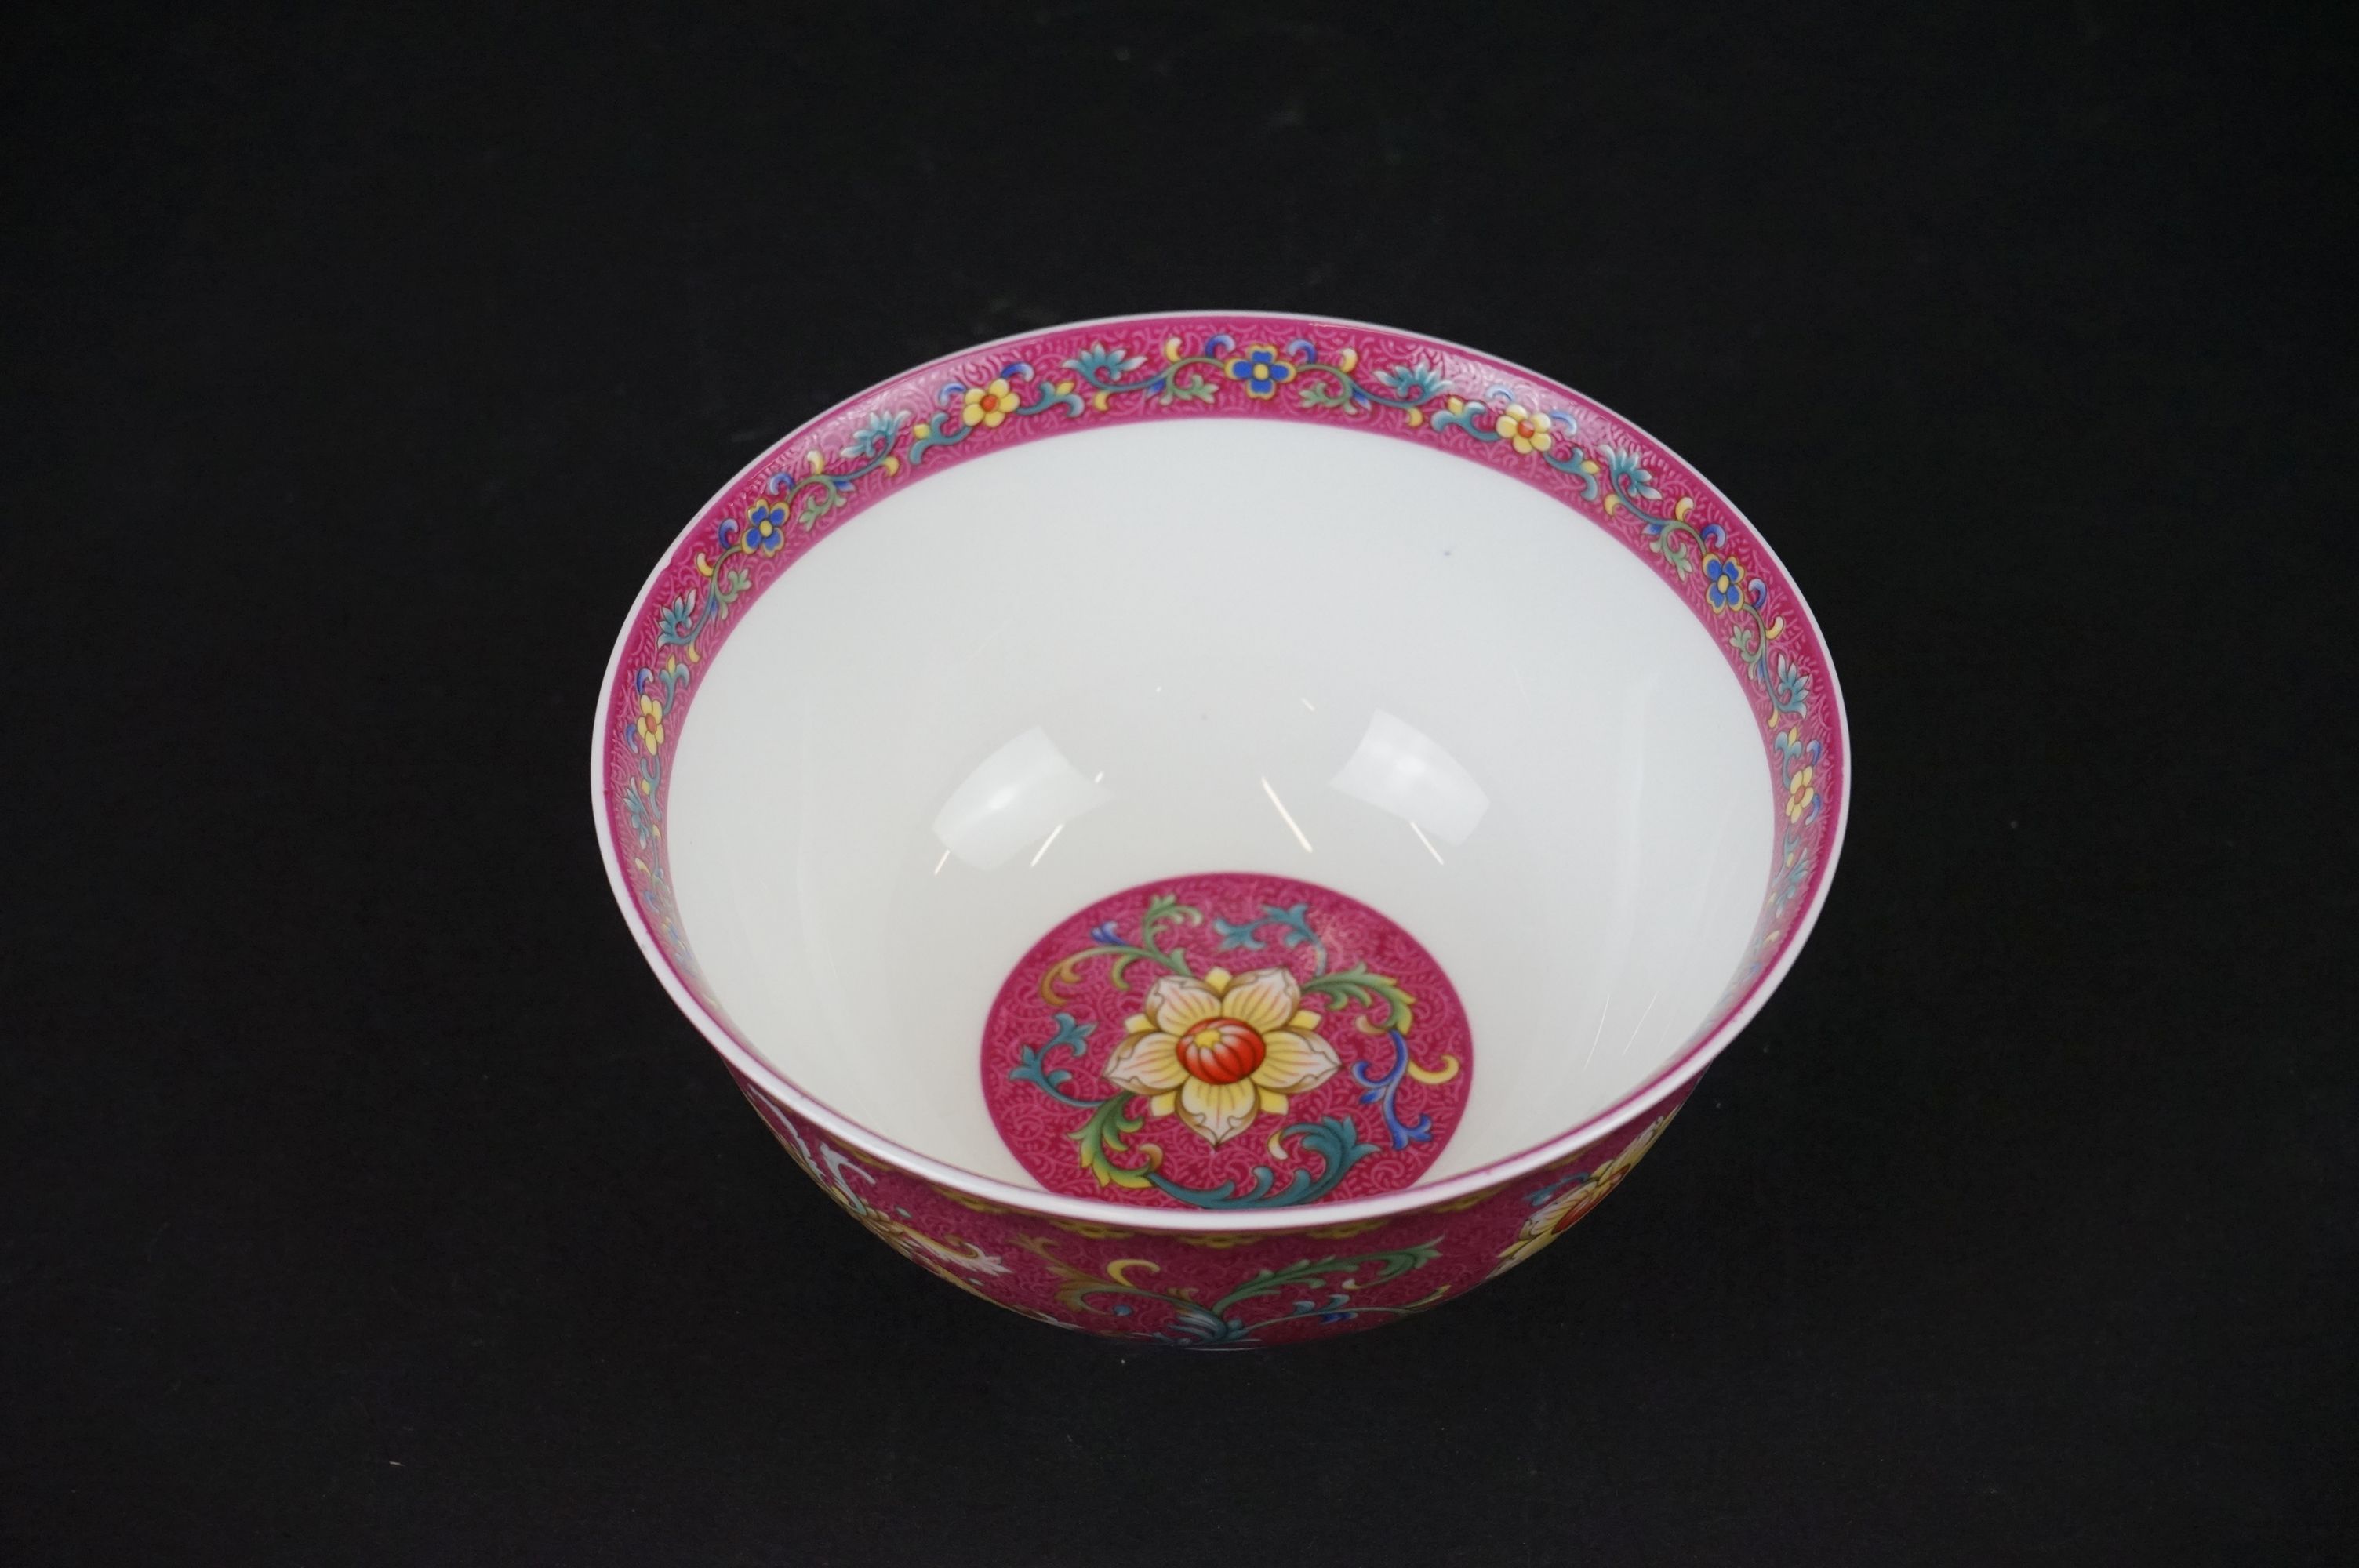 Chinese Porcelain Bowl decorated in enamels with scrolling flowers on a pink and yellow ground, - Image 2 of 6